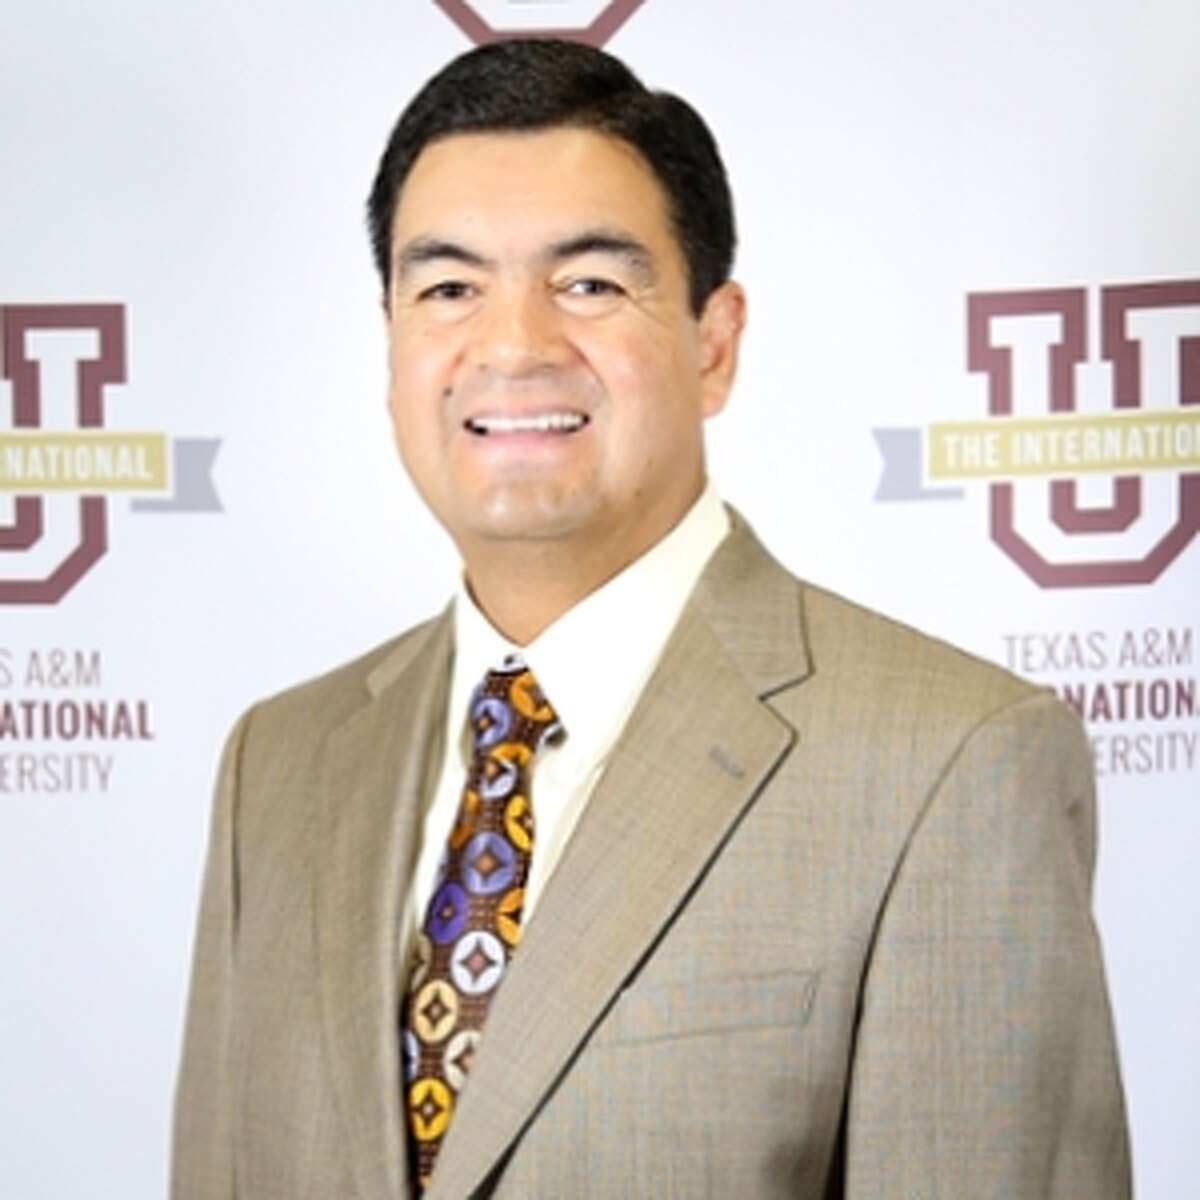 TAMIU's Dr. Alfredo Ramírez, Jr., director and superintendent of the Staggs Academy  